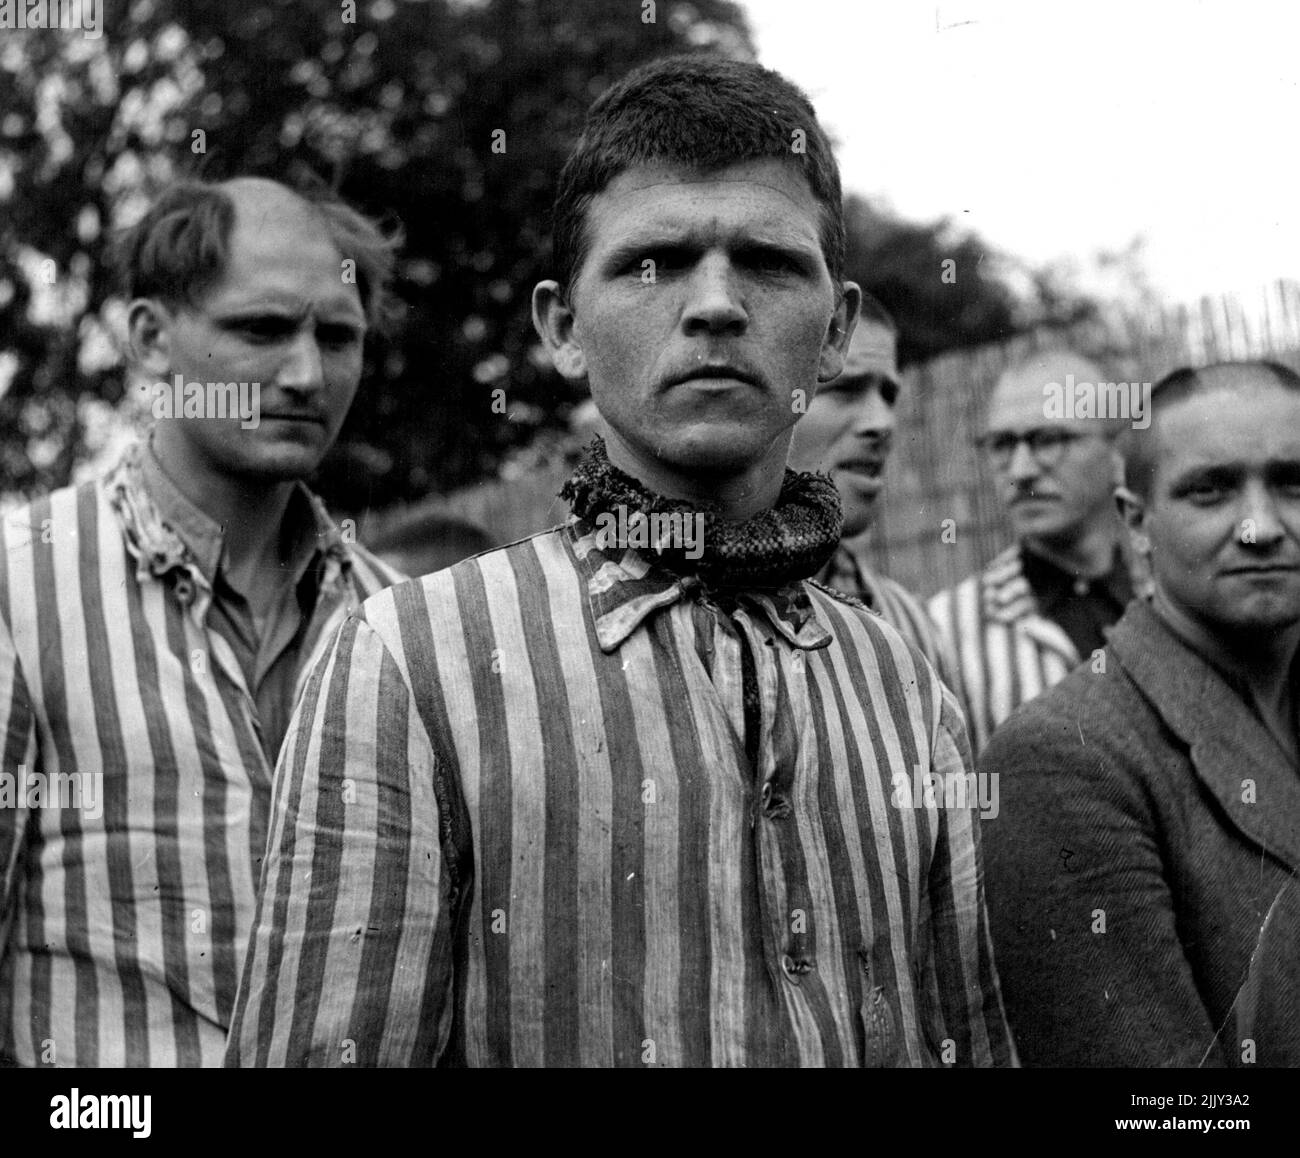 Faces of Dutch Waffen S.S. men. After the notorious concentration-camp Vught (in the Southern part of the Netherlands) had been liberated by the allied arrives, it has become a camp for Dutch collaborators are now in that camp. 300 Belong to the 'Netherlands Waffen S.S.' They are dressed in the same prisonsuits as formerly the underground resistant members were put-in after they had been transported to Vught. June 01, 1945. (Photo by Anefo). Stock Photo